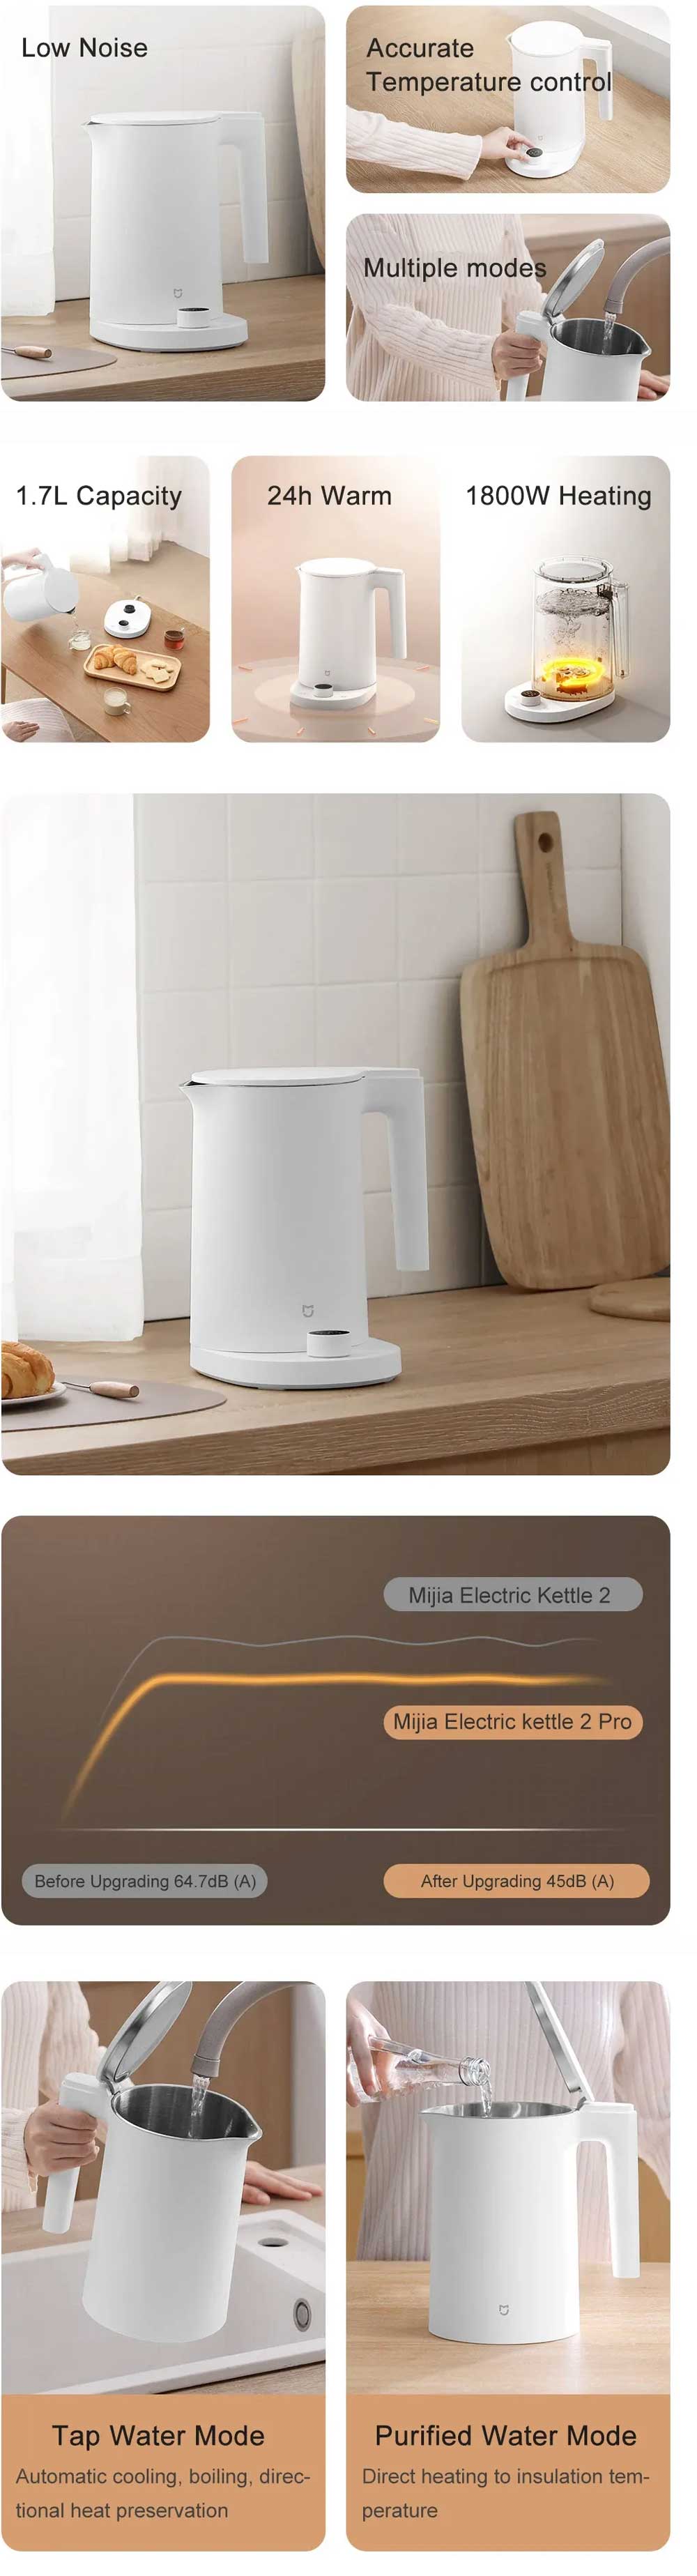 Xiaomi Mijia Thermostatic Electric Kettle 2 Pro 1.7L Stainless Steel App Control with LED Display